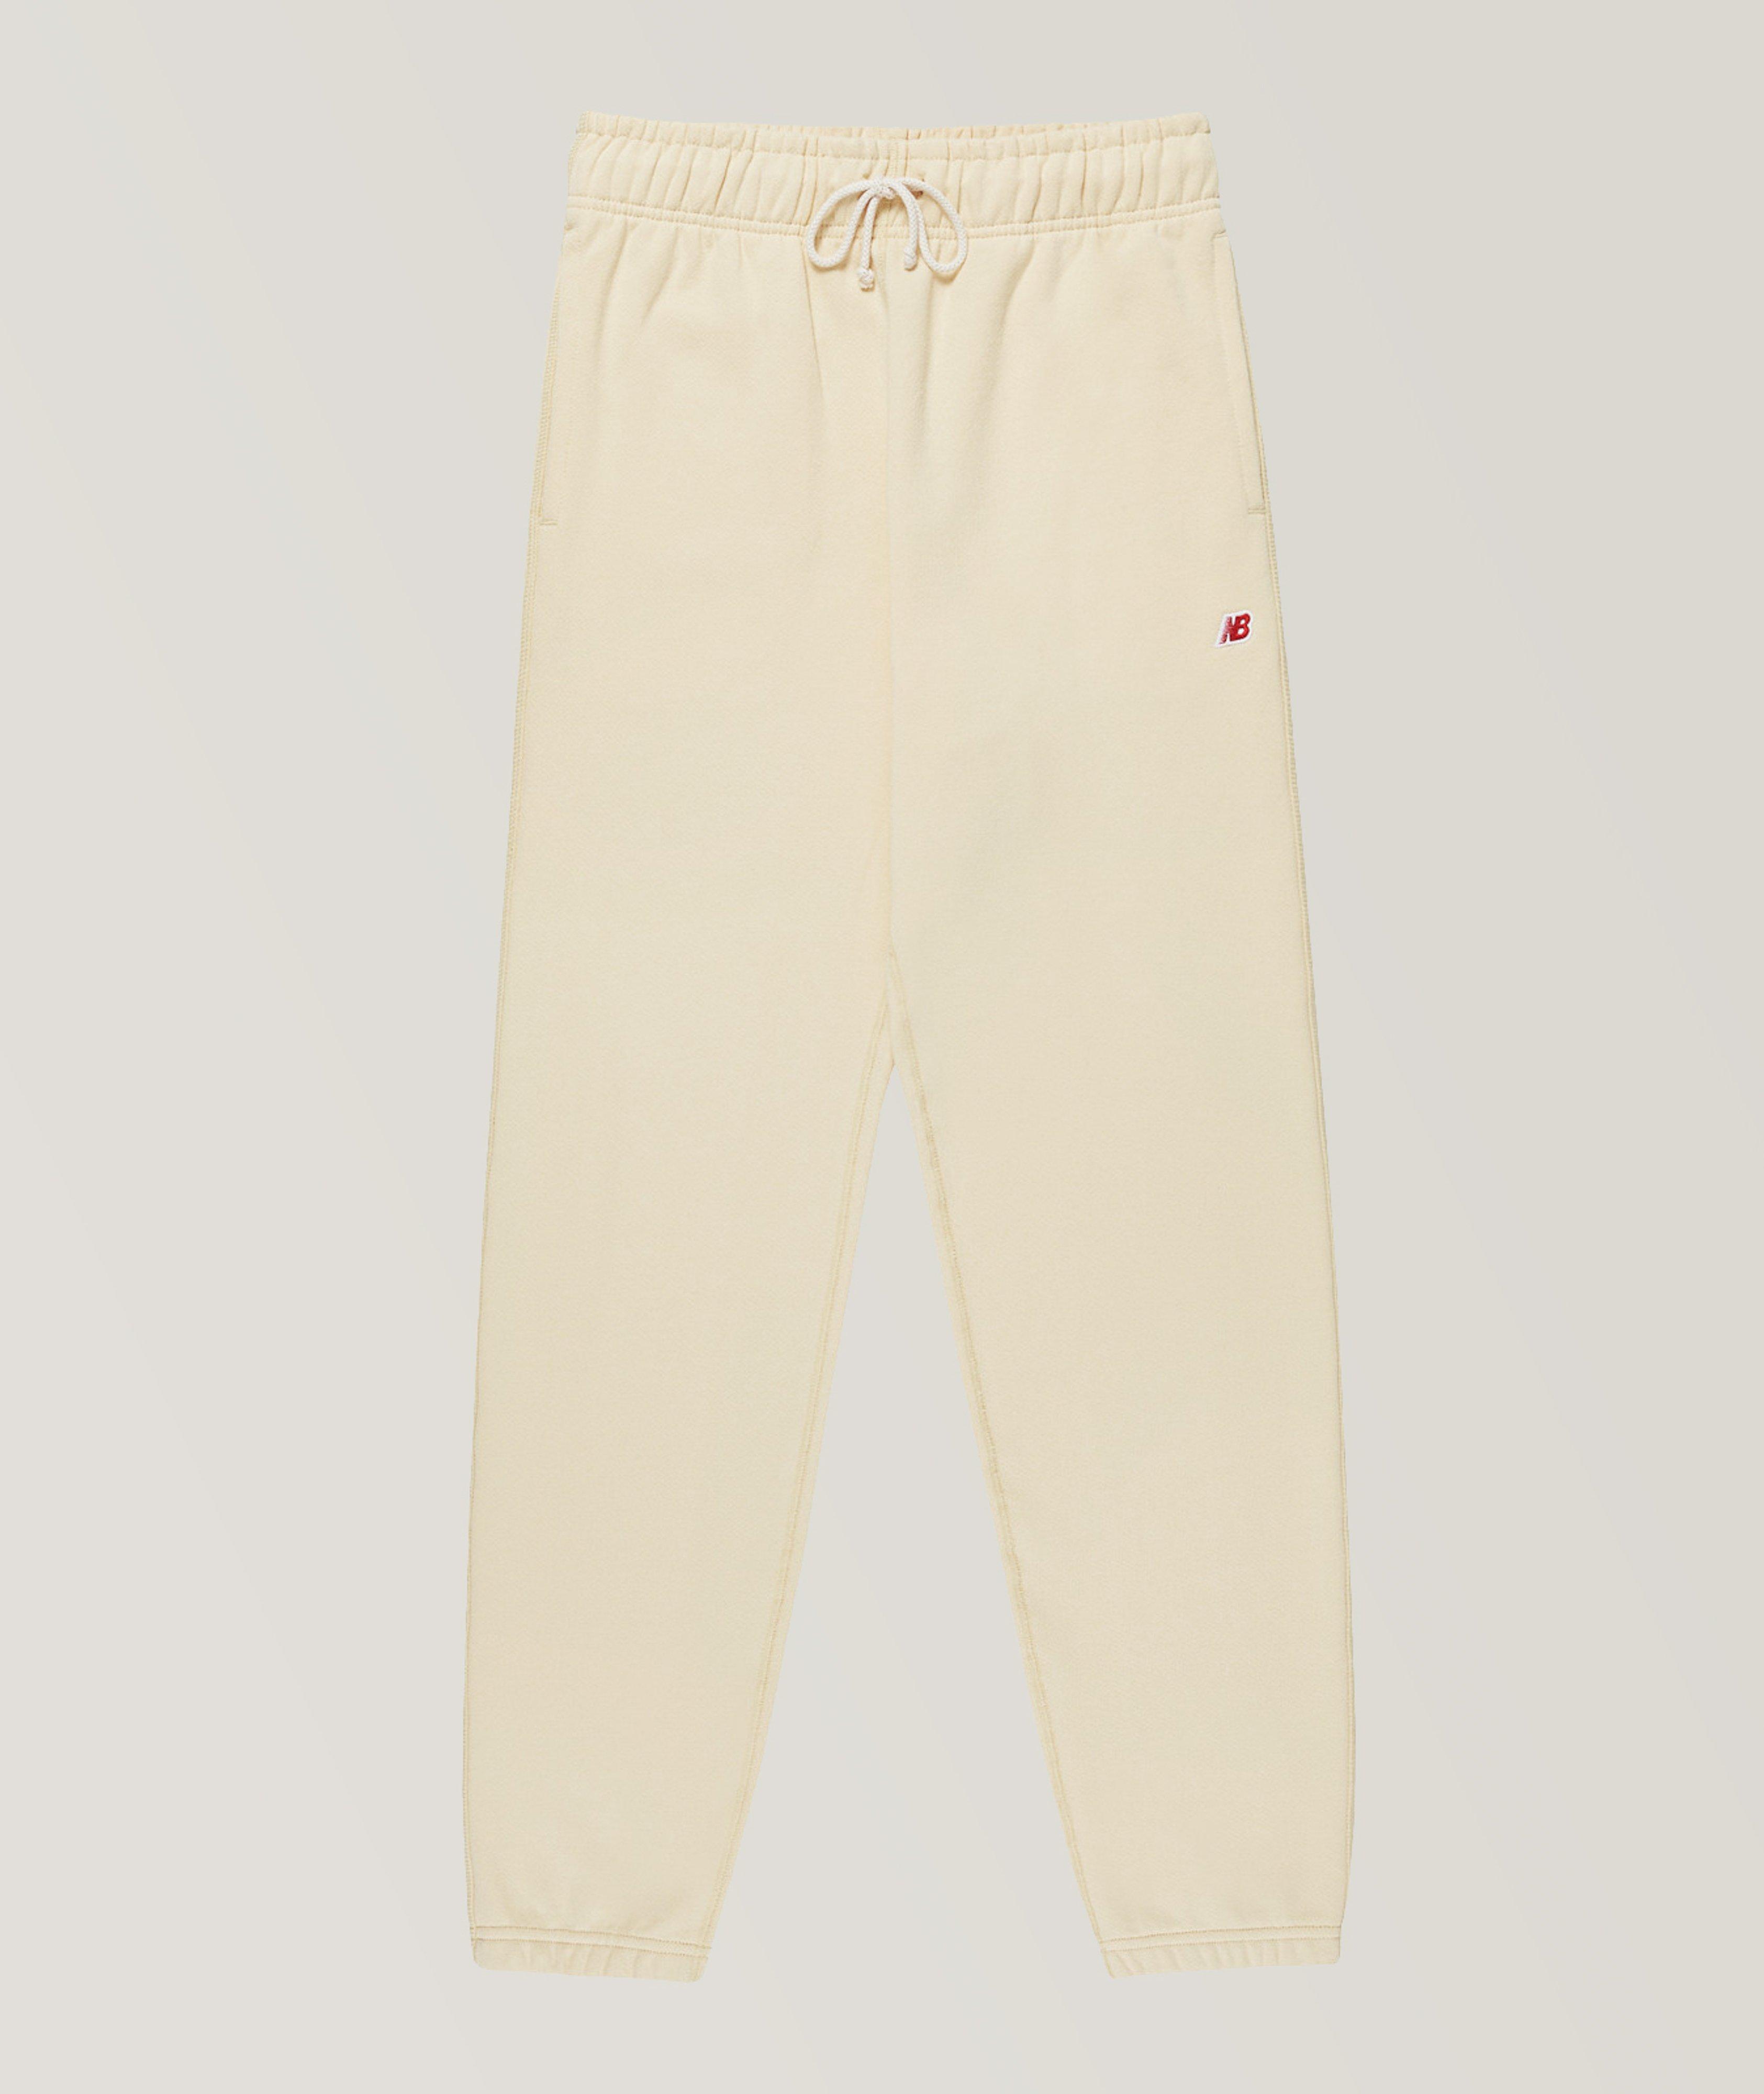 French Terry Cotton Sweatpants image 0